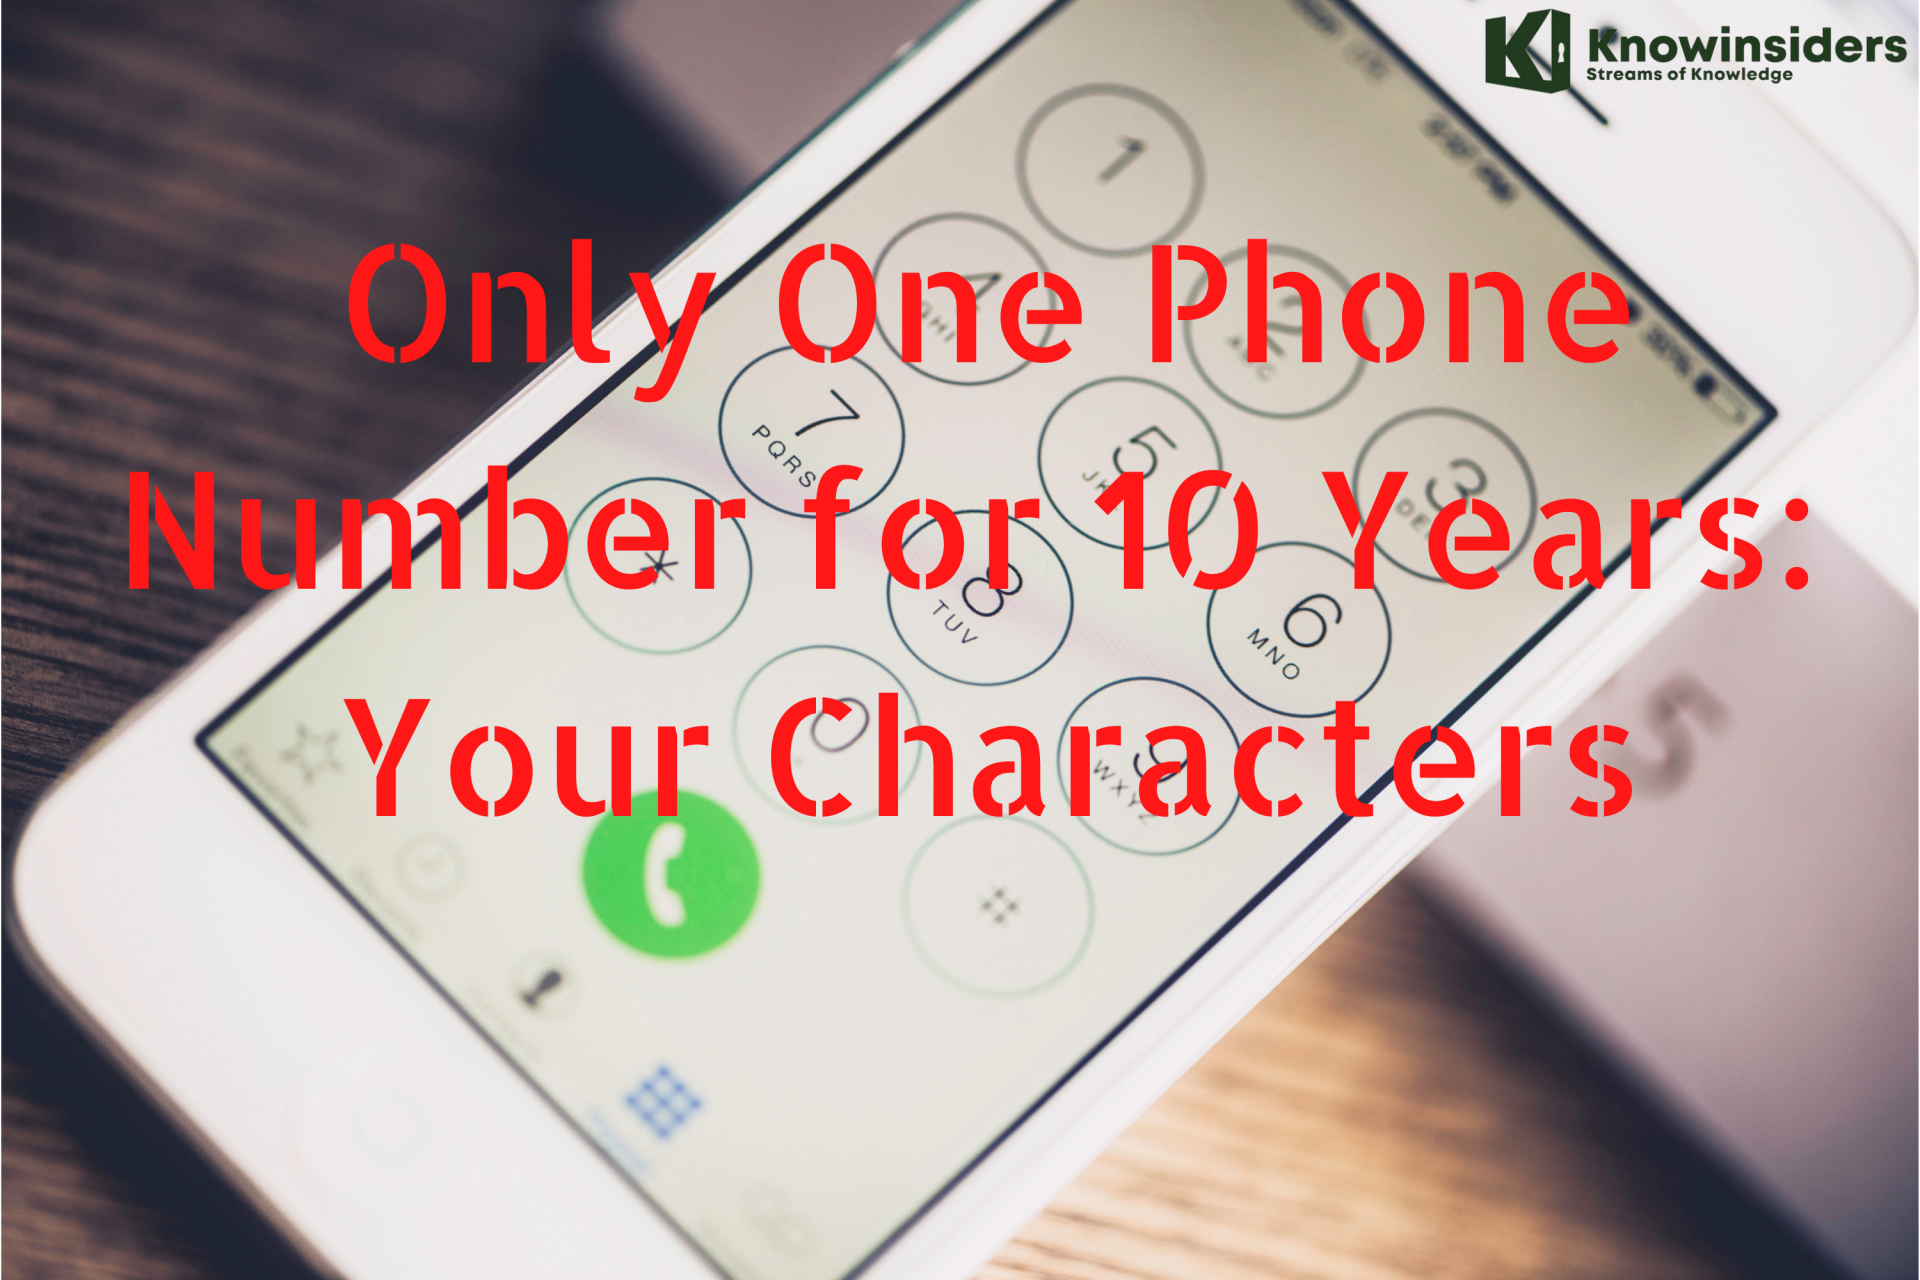 Only One Phone Number for 10 Years: Reveal 4 Precious Virtues and Characteristics